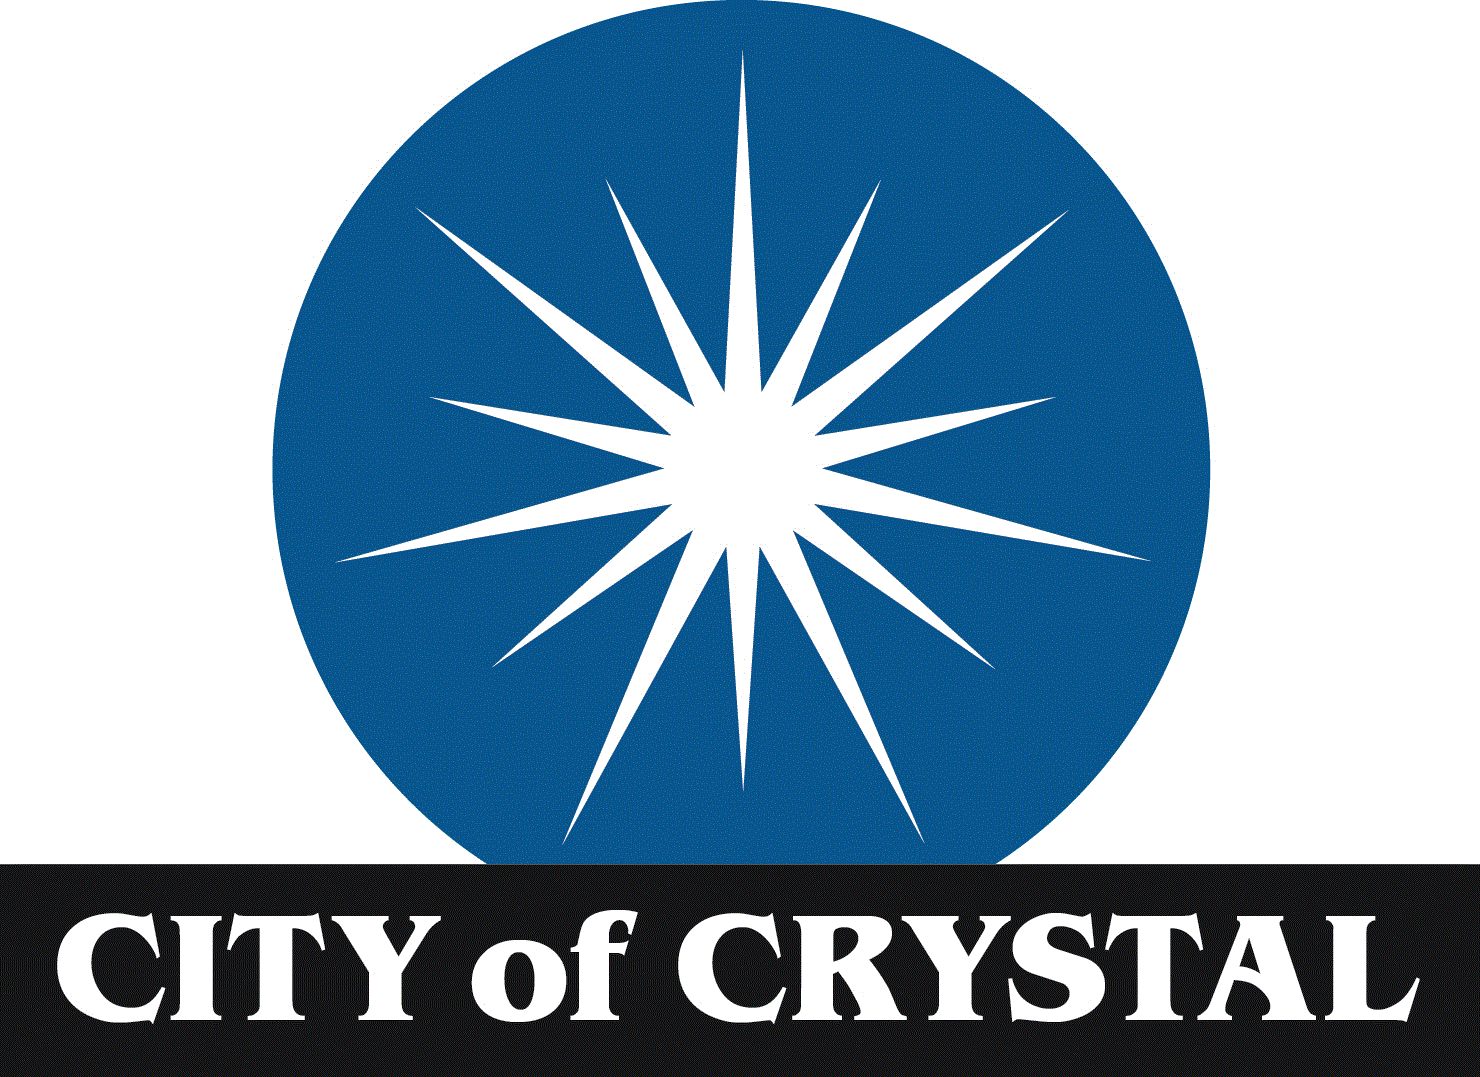 City of Crystal